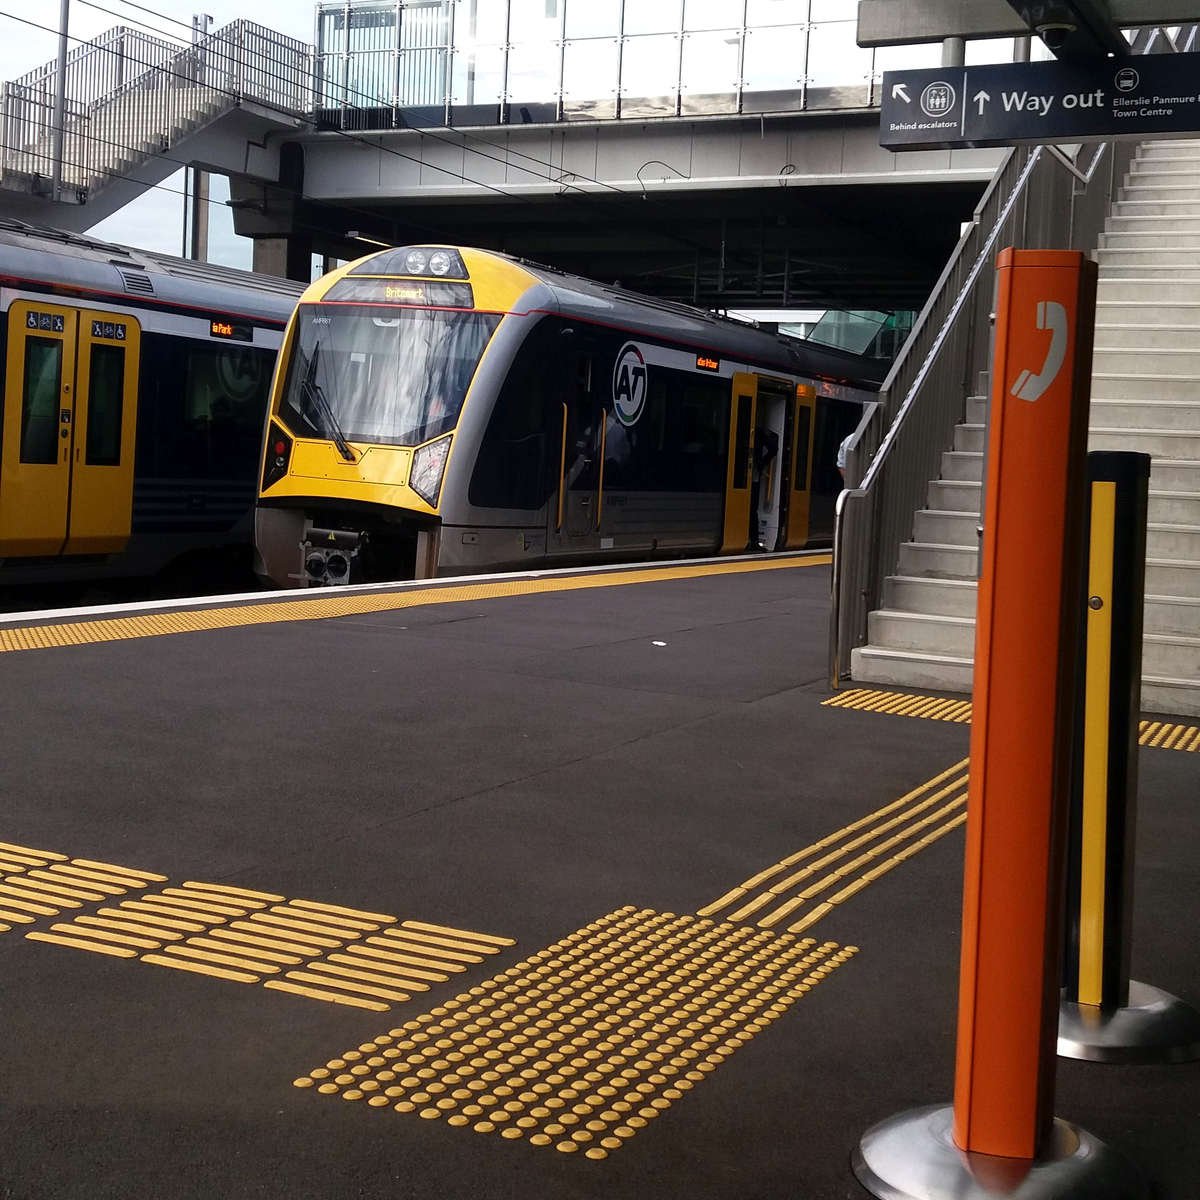 TacPro yellow polyurethane warning and directional tactile indicators installed on platform edge and misc help points/fare payment devices. Two trains pass each other.